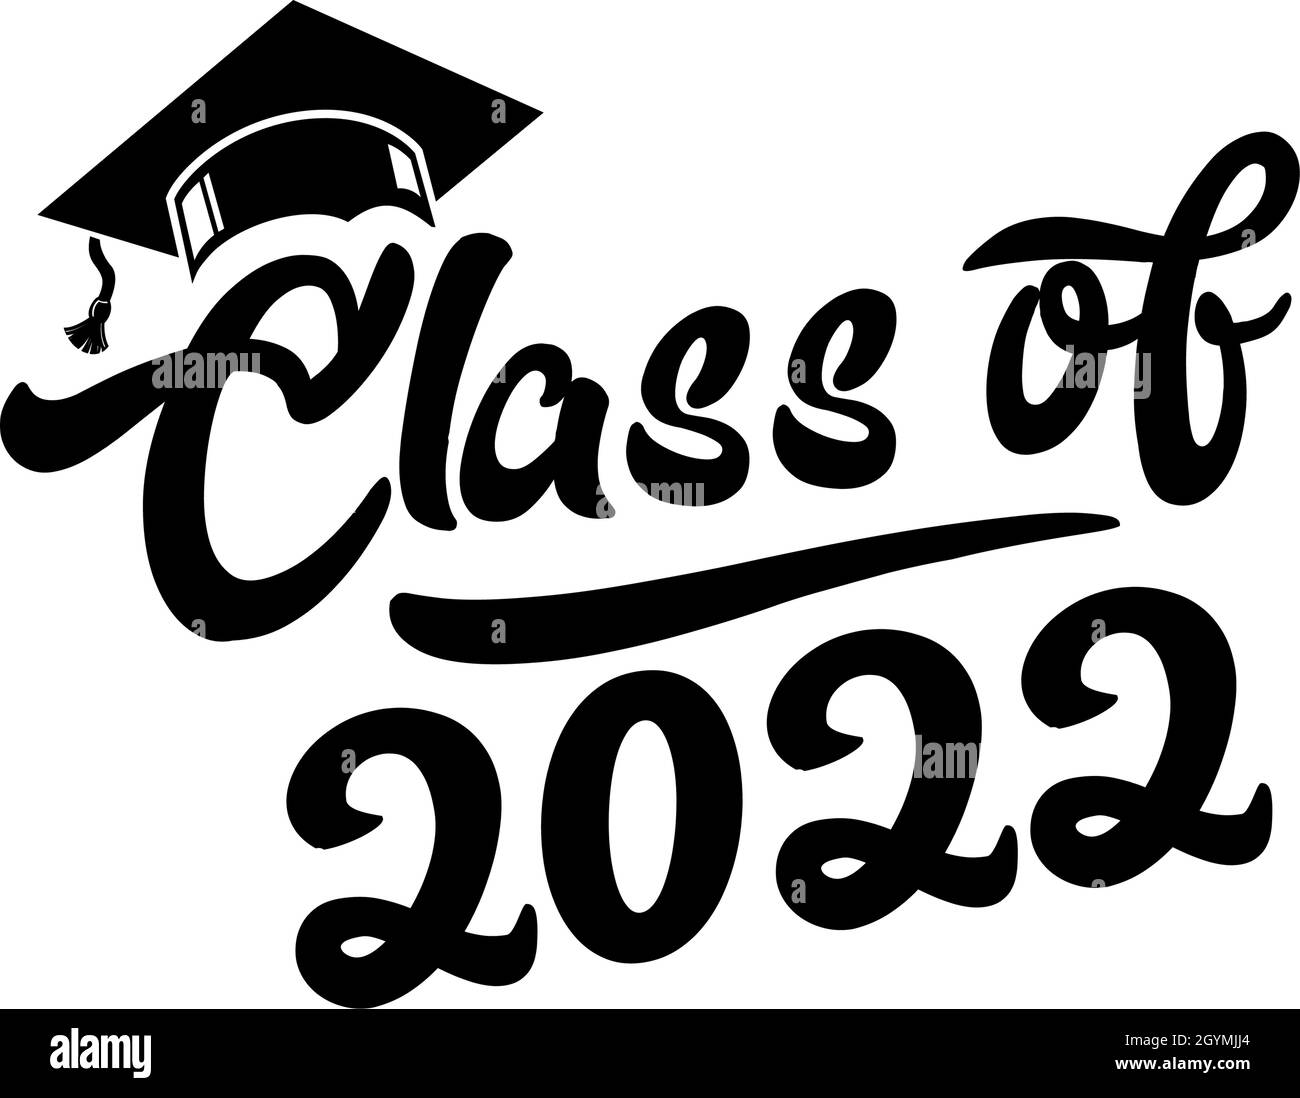 Lettering Class of 2022 for greeting, invitation card. Text for graduation design, congratulation event, T-shirt, party, high school or college gradua Stock Vector